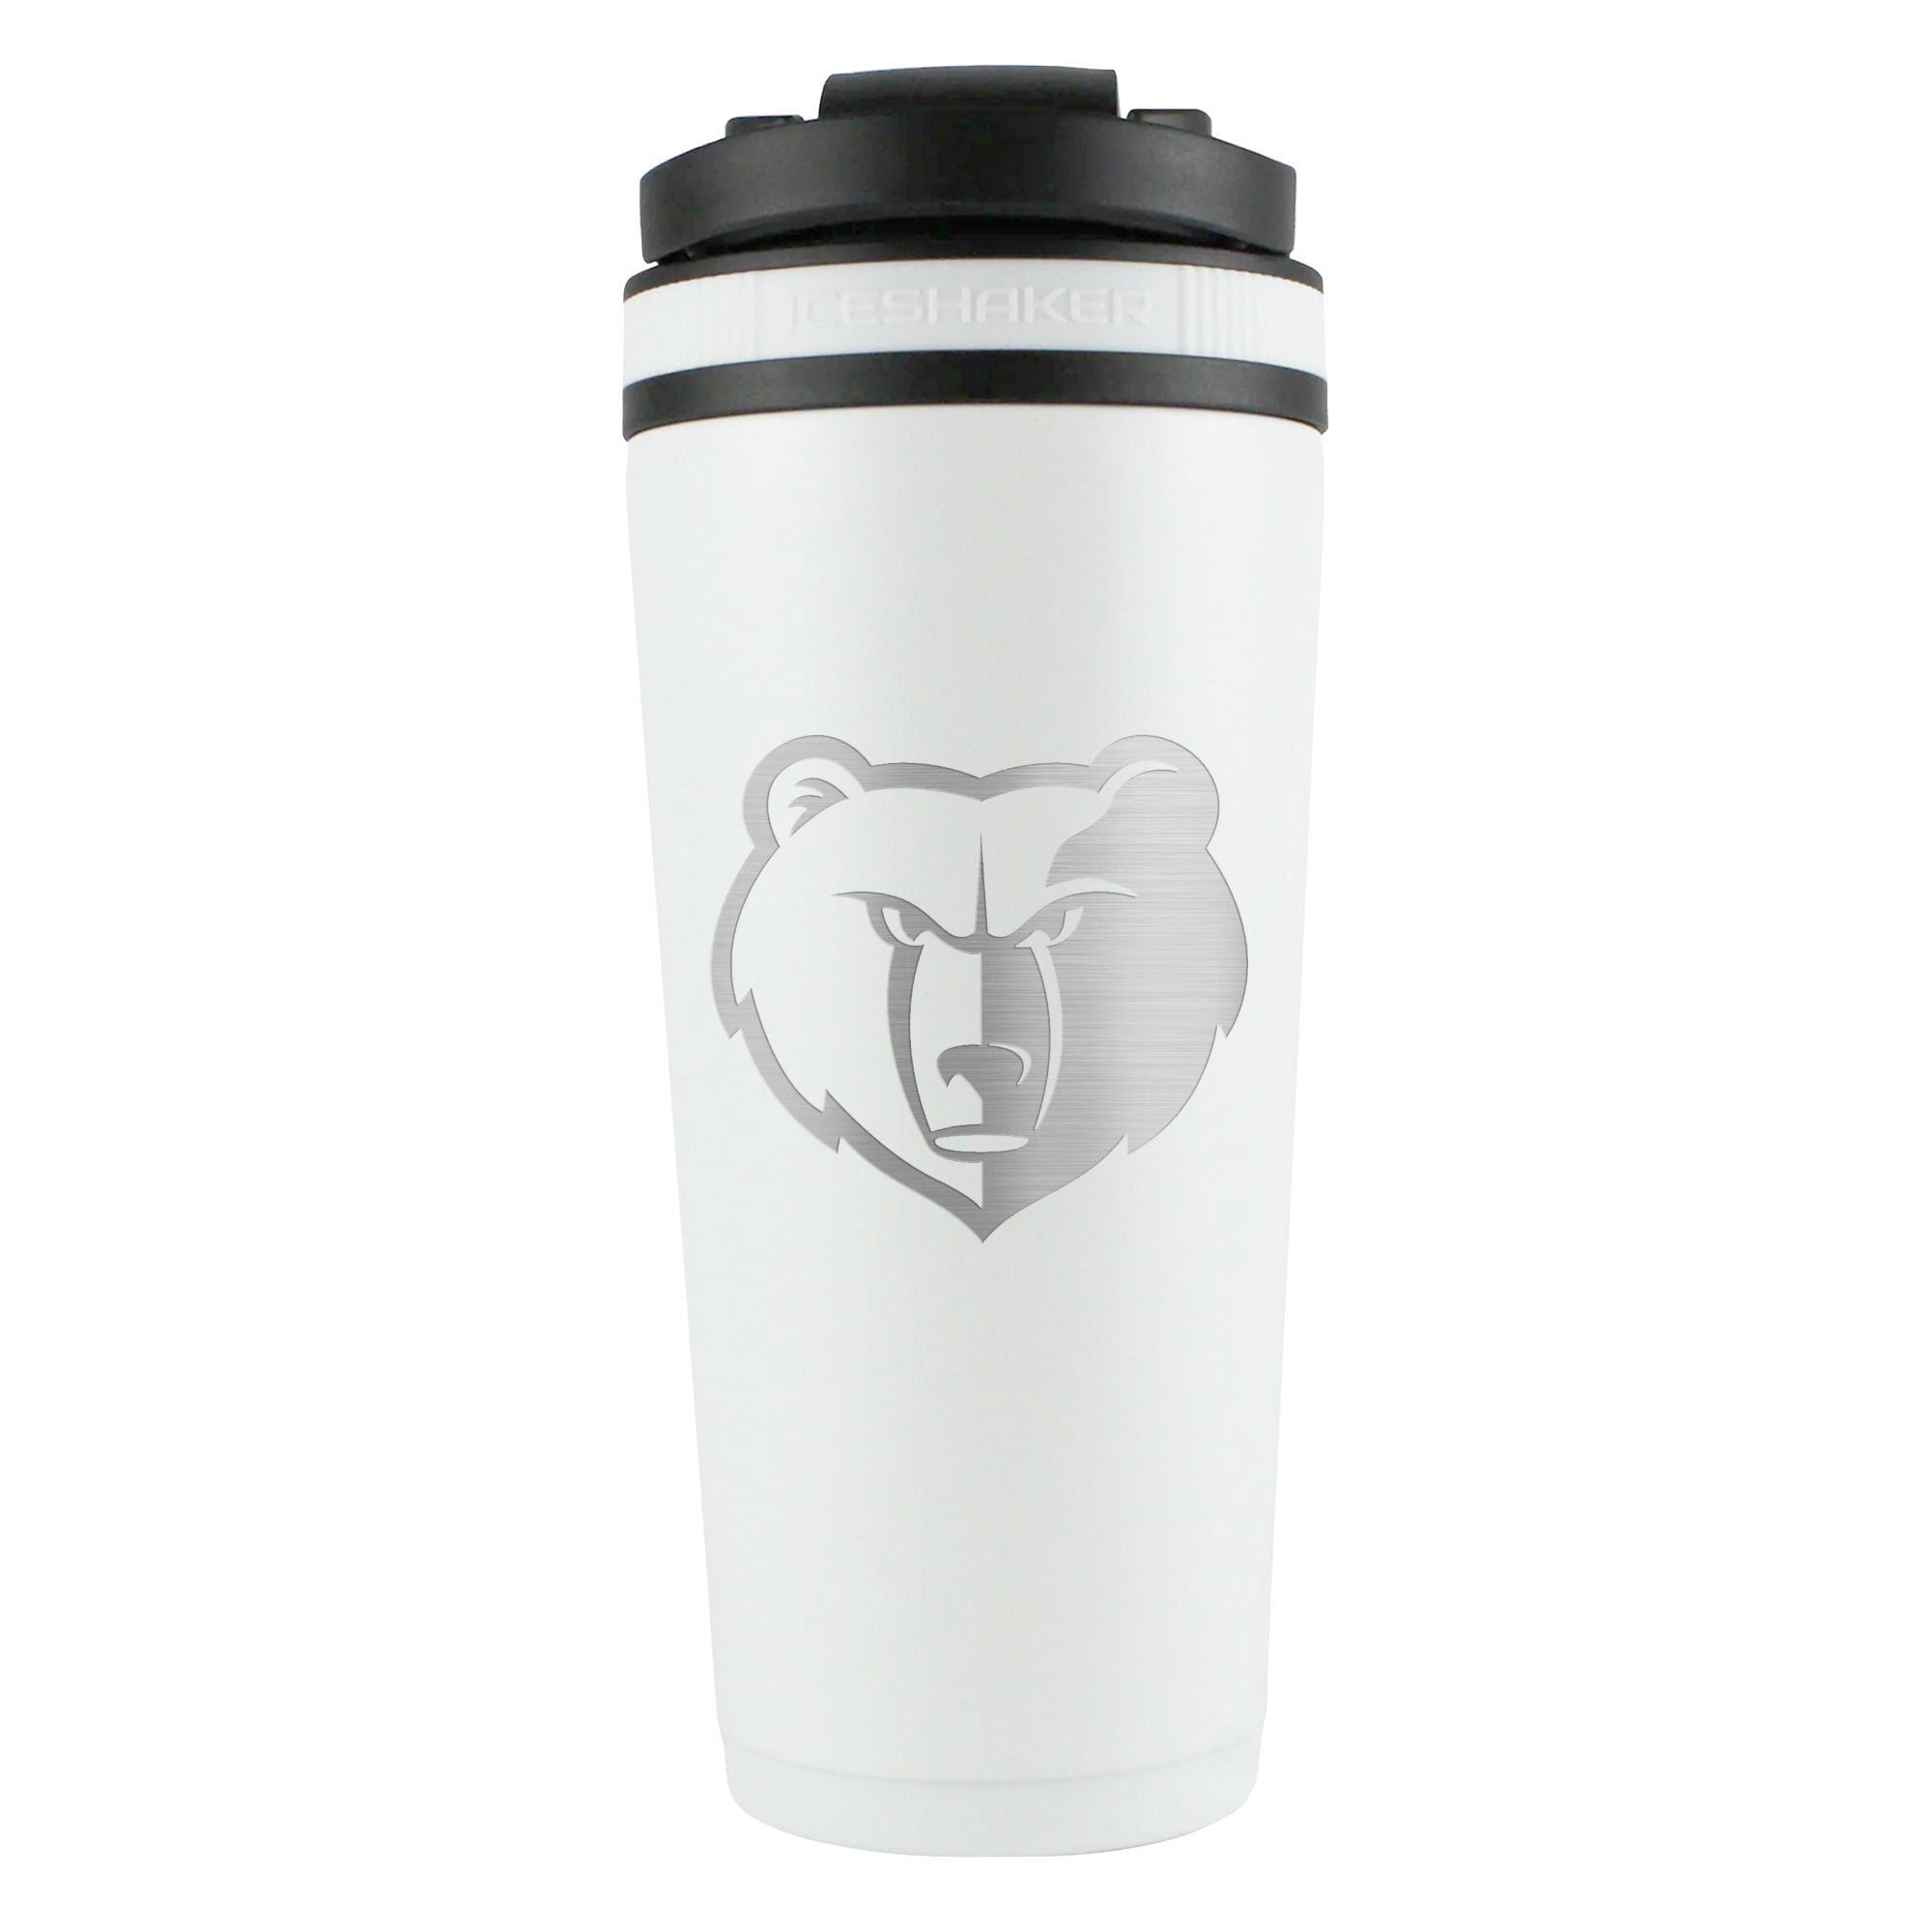 Officially Licensed Memphis Grizzlies 26oz Ice Shaker - White